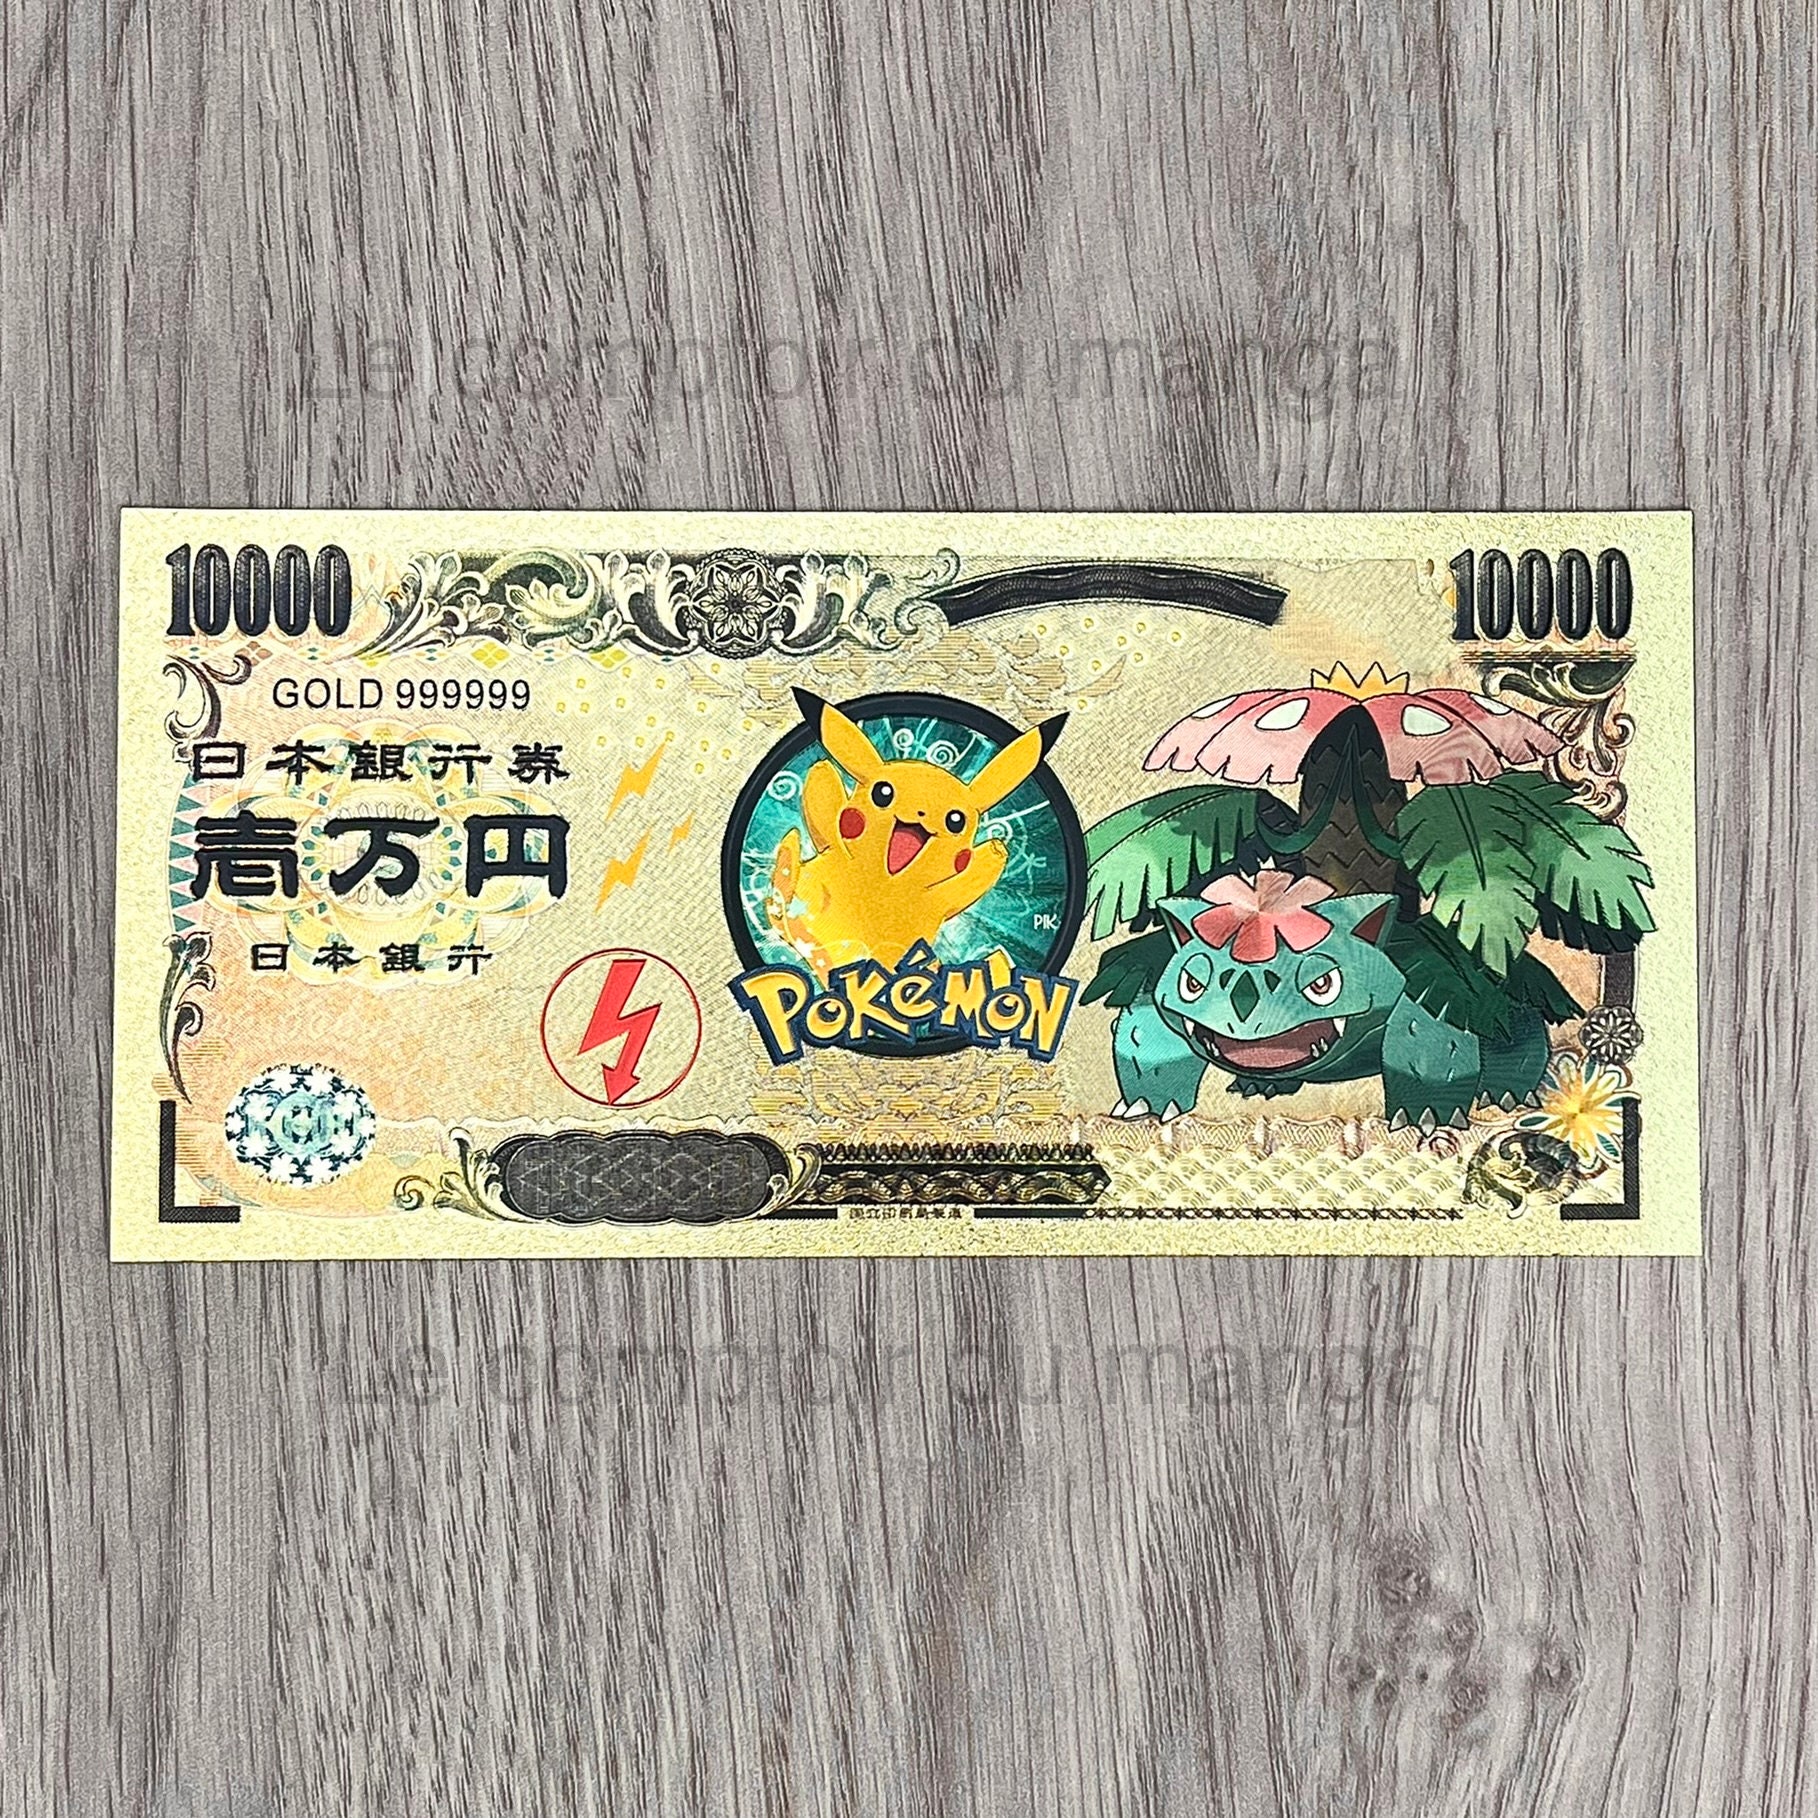 Pokemon Gold Banknote Bill 24KT W/ Certificate of Auth, NIPPON GINKO *You  Choose